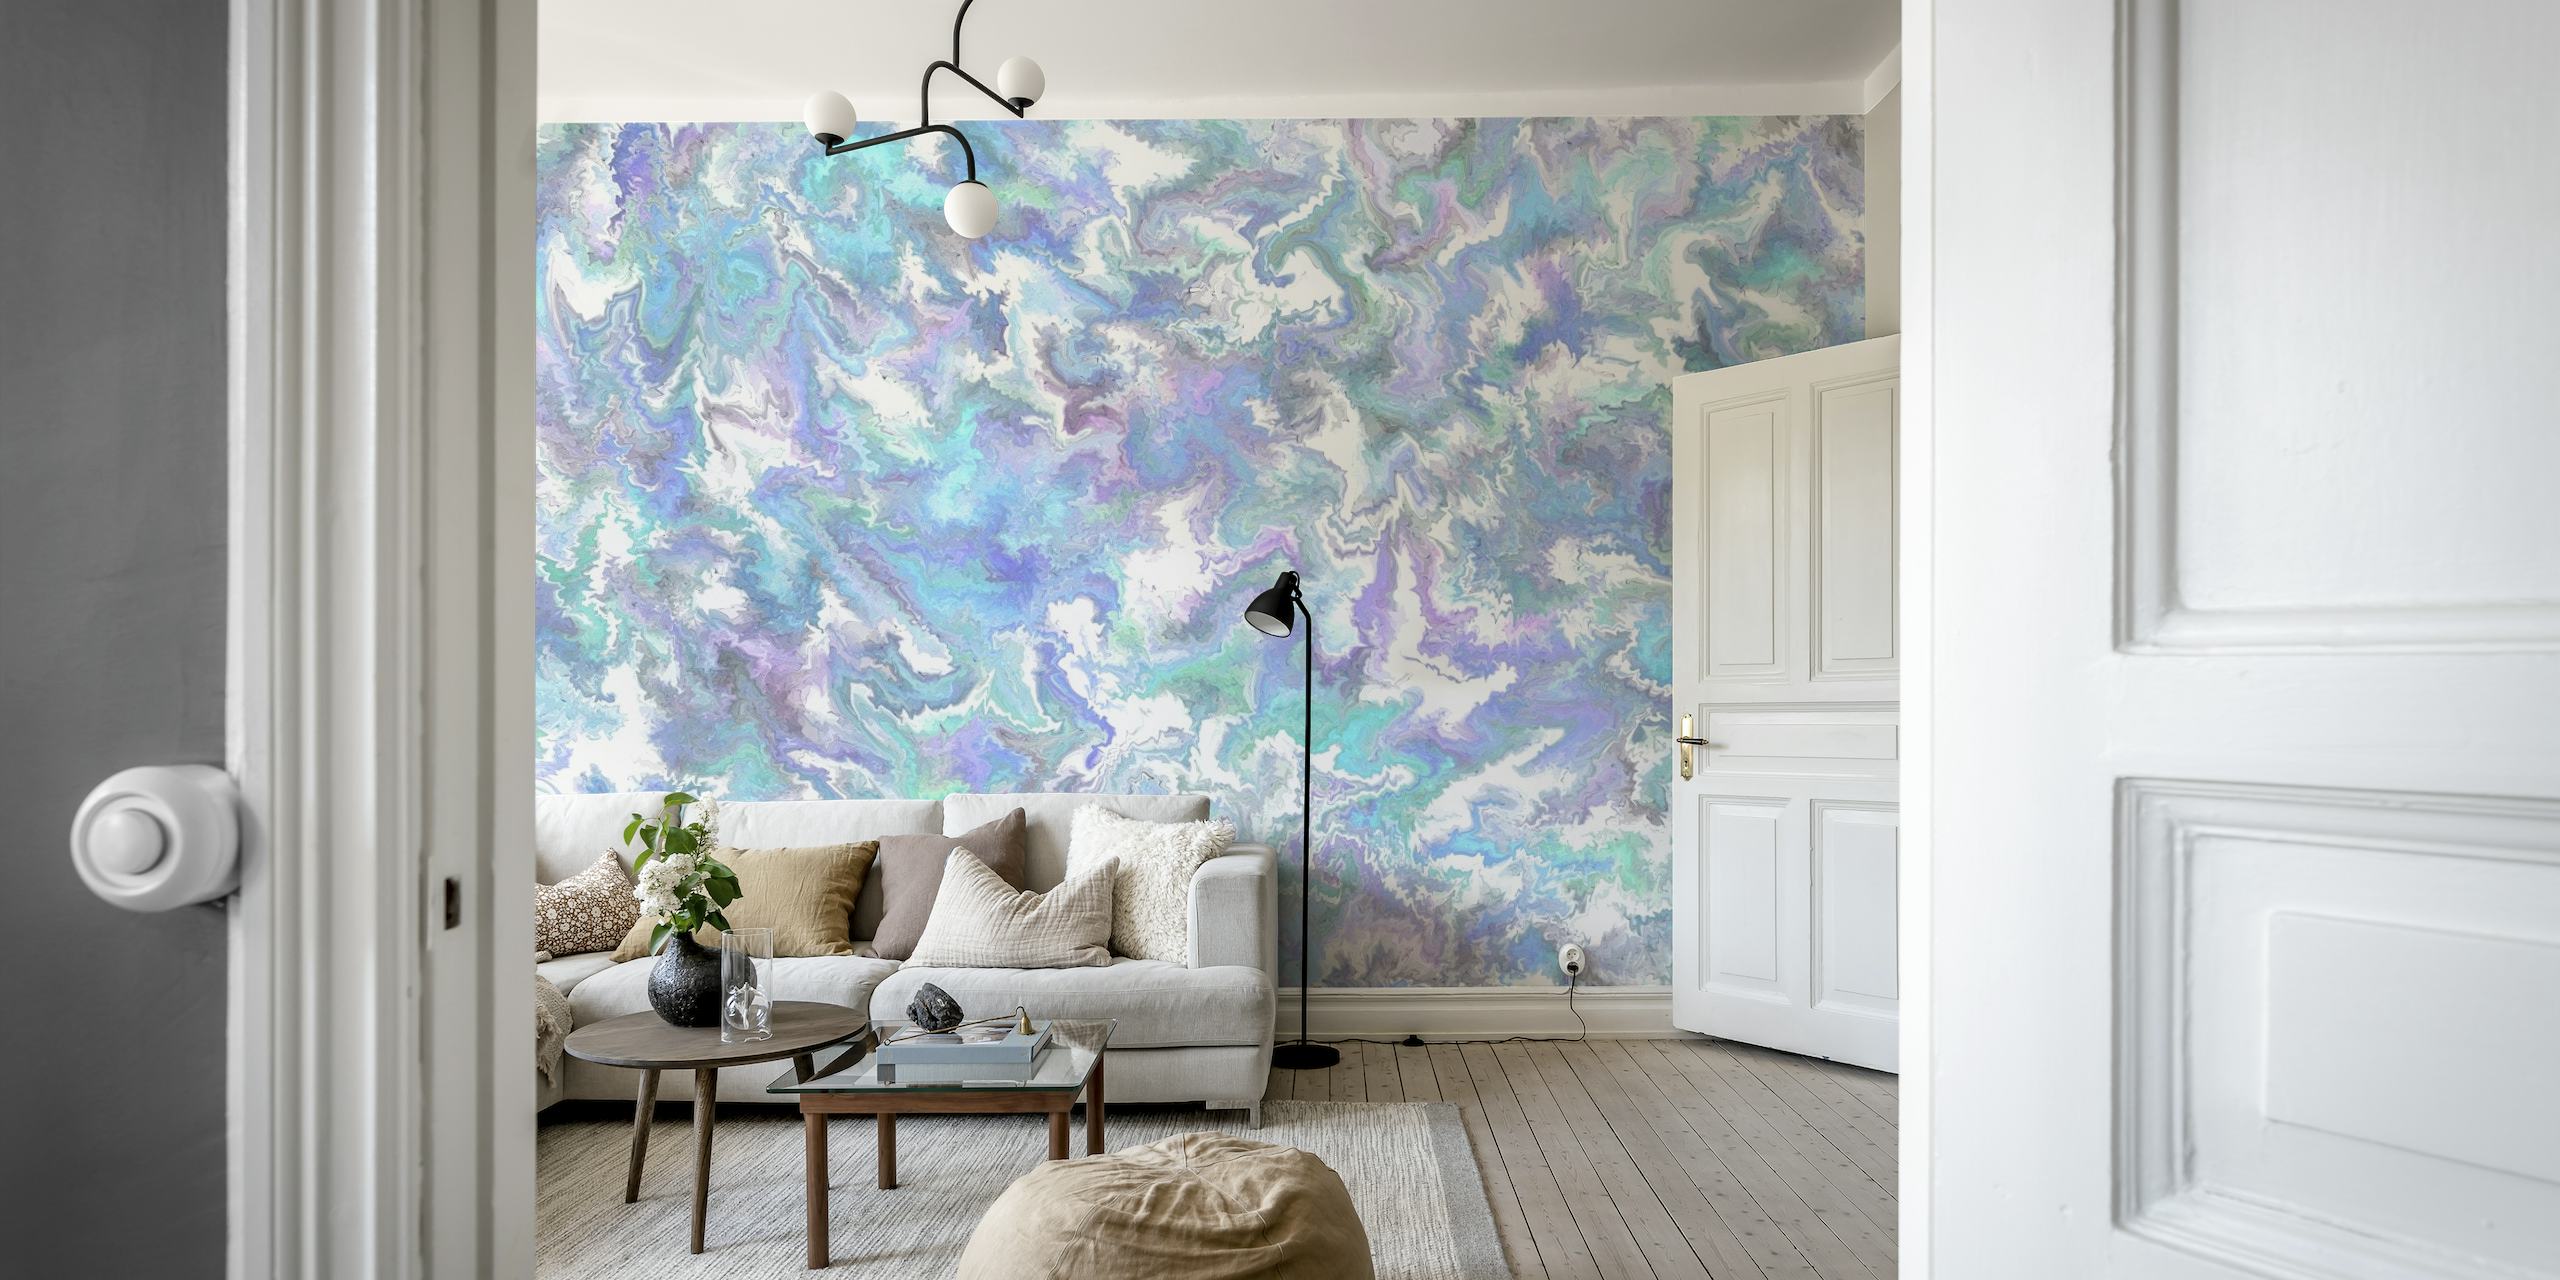 Abstract blue and lavender fluid art wall mural